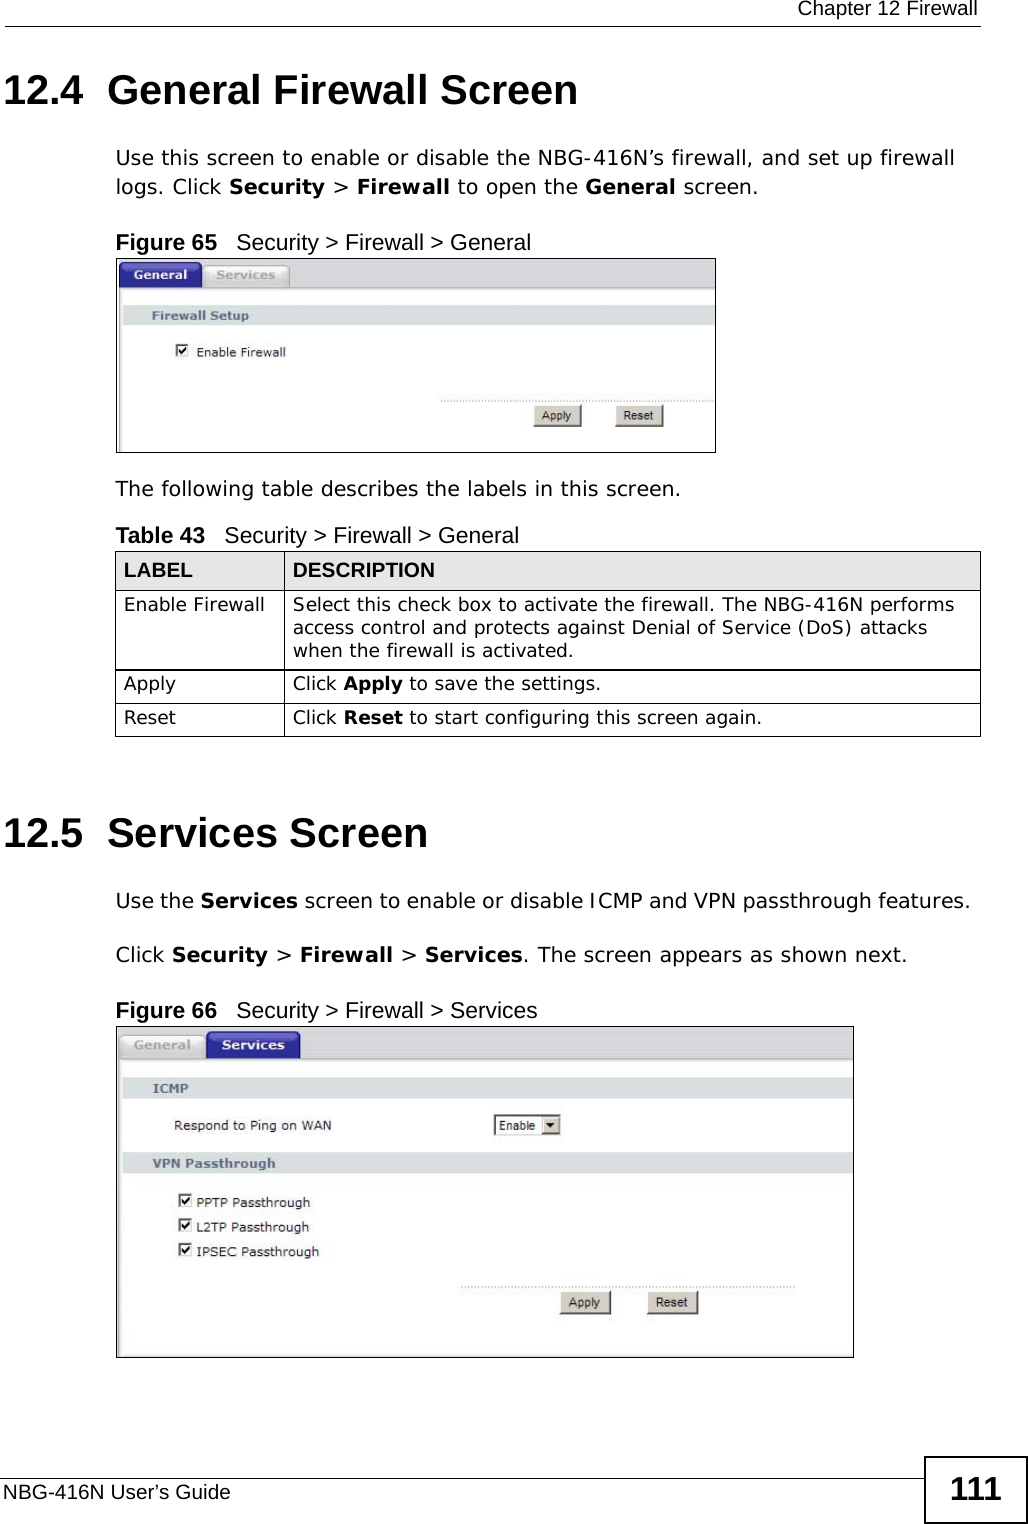  Chapter 12 FirewallNBG-416N User’s Guide 11112.4  General Firewall Screen   Use this screen to enable or disable the NBG-416N’s firewall, and set up firewall logs. Click Security &gt; Firewall to open the General screen.Figure 65   Security &gt; Firewall &gt; General The following table describes the labels in this screen.12.5  Services Screen   Use the Services screen to enable or disable ICMP and VPN passthrough features. Click Security &gt; Firewall &gt; Services. The screen appears as shown next. Figure 66   Security &gt; Firewall &gt; Services Table 43   Security &gt; Firewall &gt; GeneralLABEL DESCRIPTIONEnable Firewall Select this check box to activate the firewall. The NBG-416N performs access control and protects against Denial of Service (DoS) attacks when the firewall is activated.Apply Click Apply to save the settings. Reset Click Reset to start configuring this screen again. 